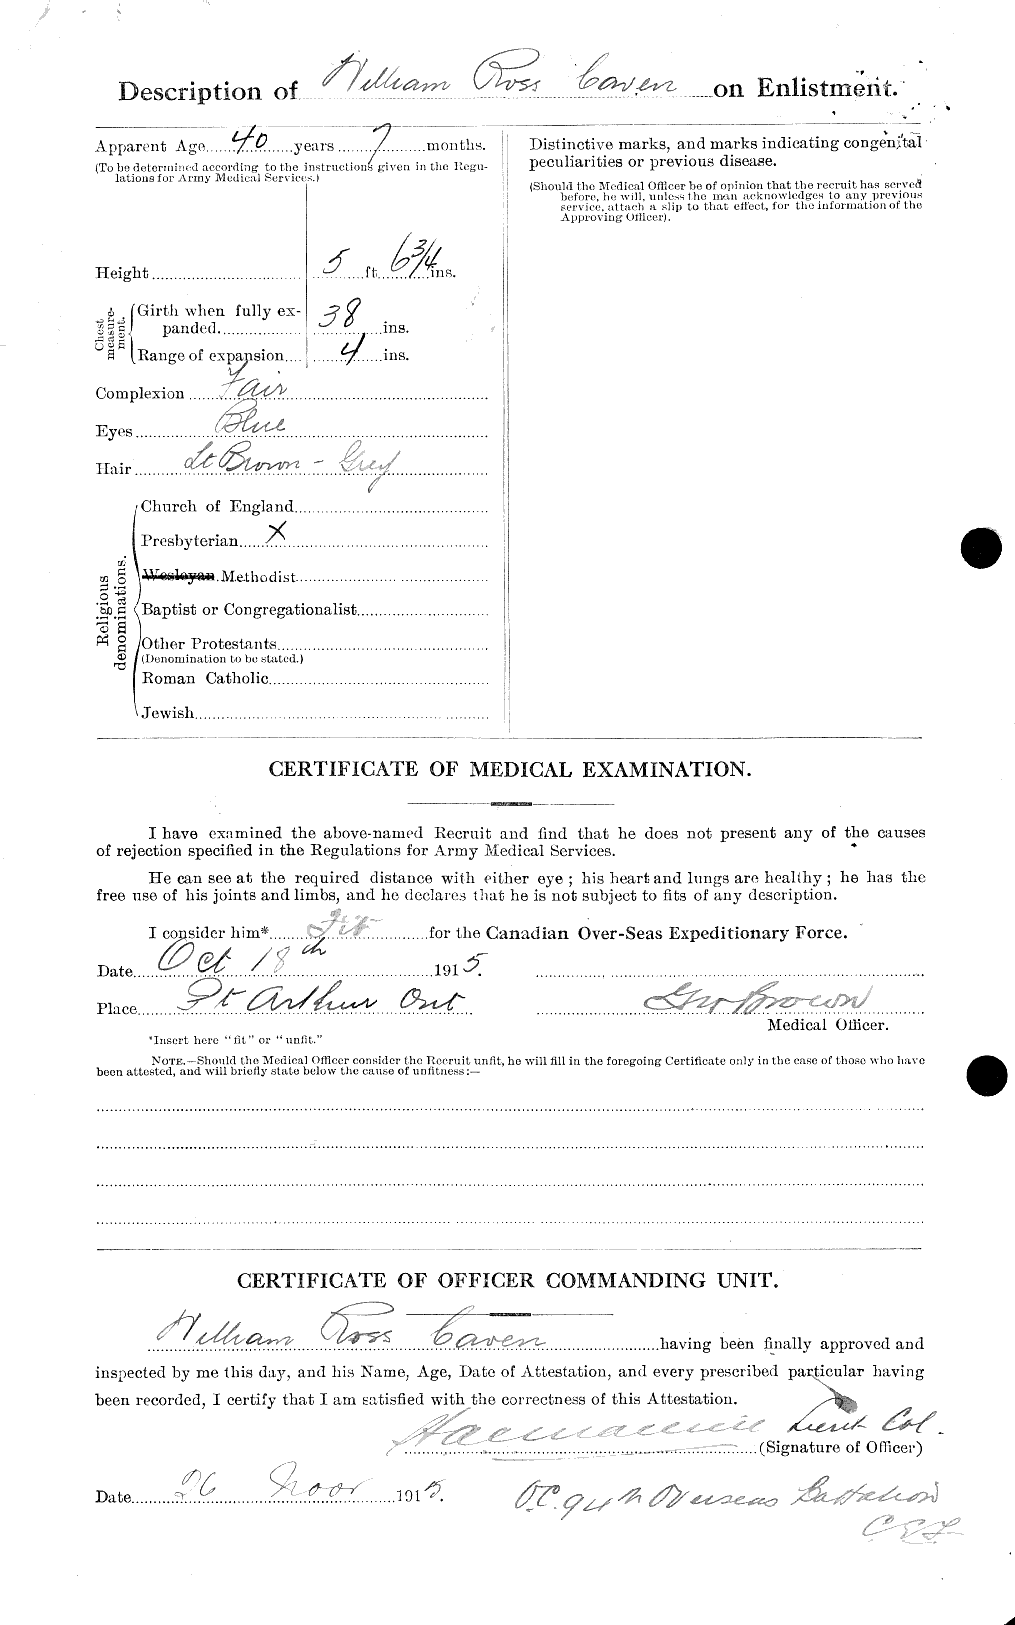 Personnel Records of the First World War - CEF 013438b